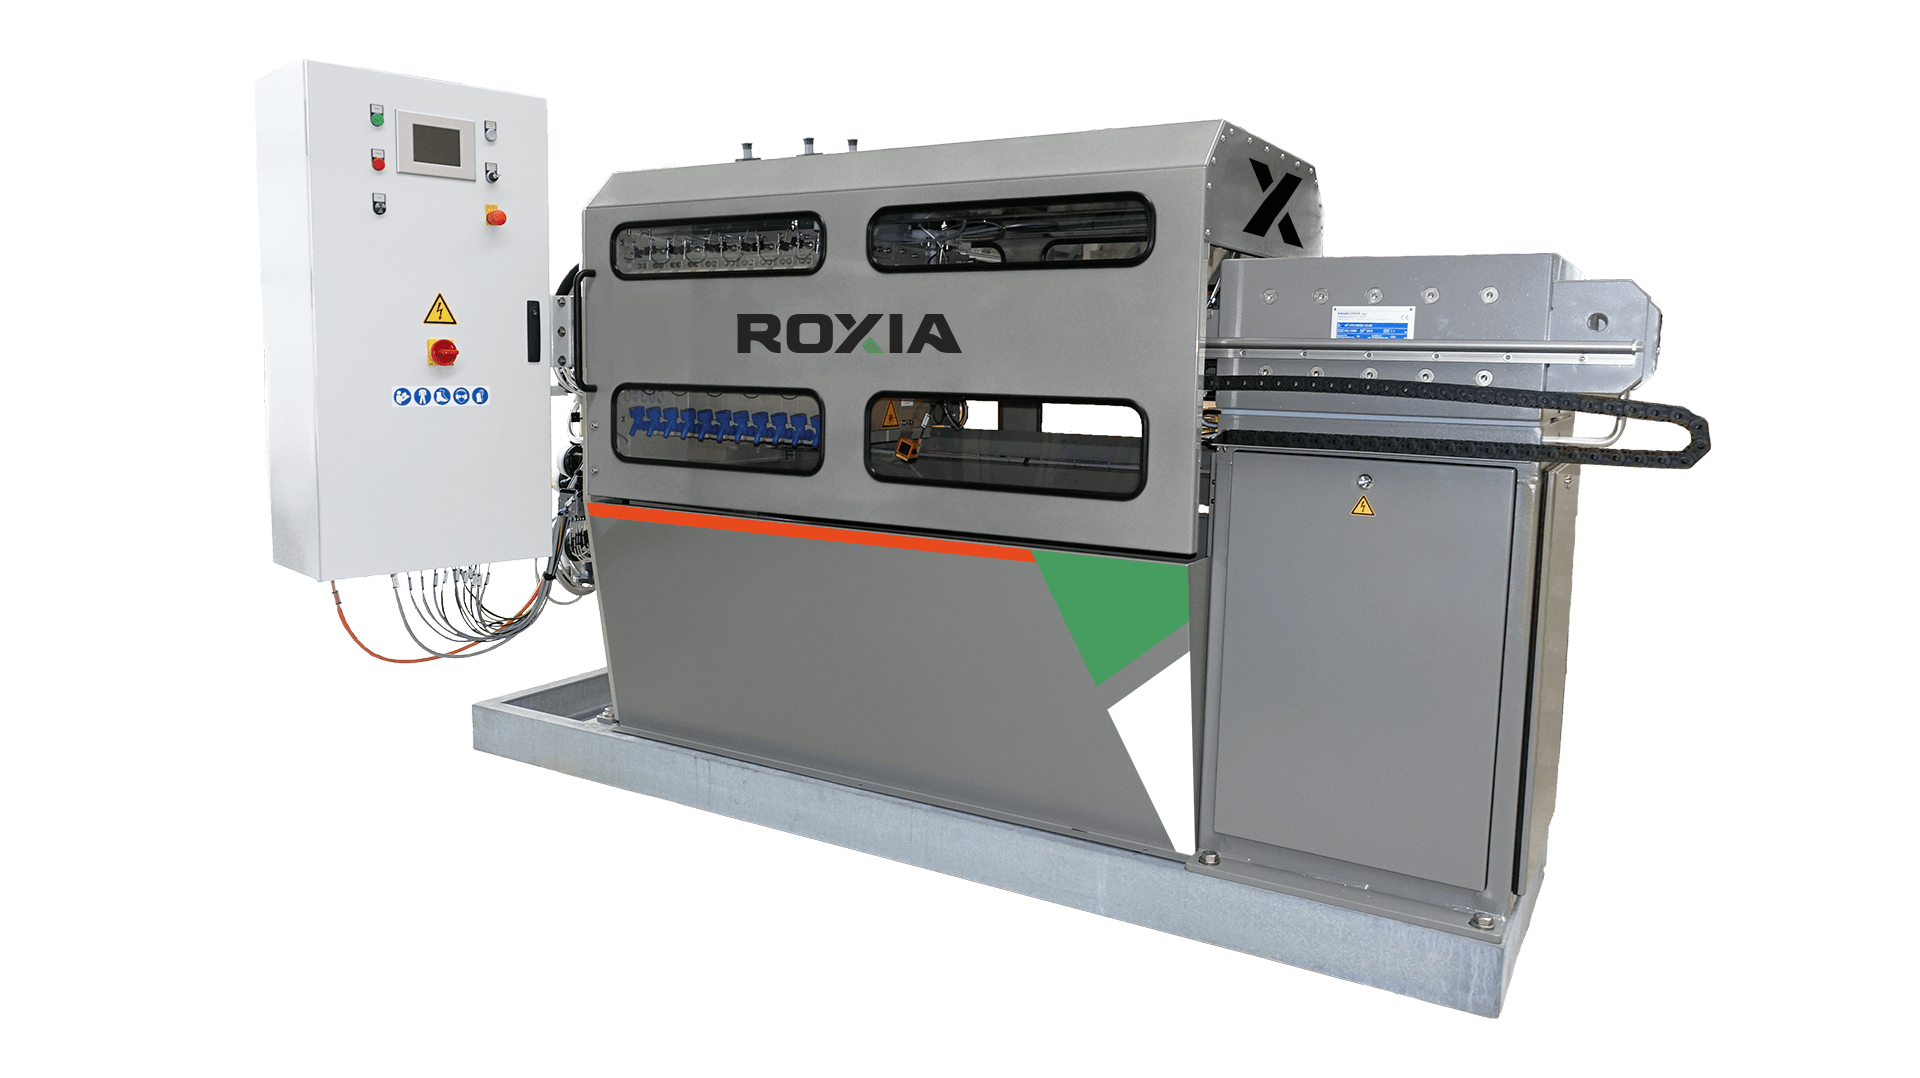 Roxia Smart Filter Press runs self-diagnostic in each filtration cycle, making it fully automatic self cleaning filter.